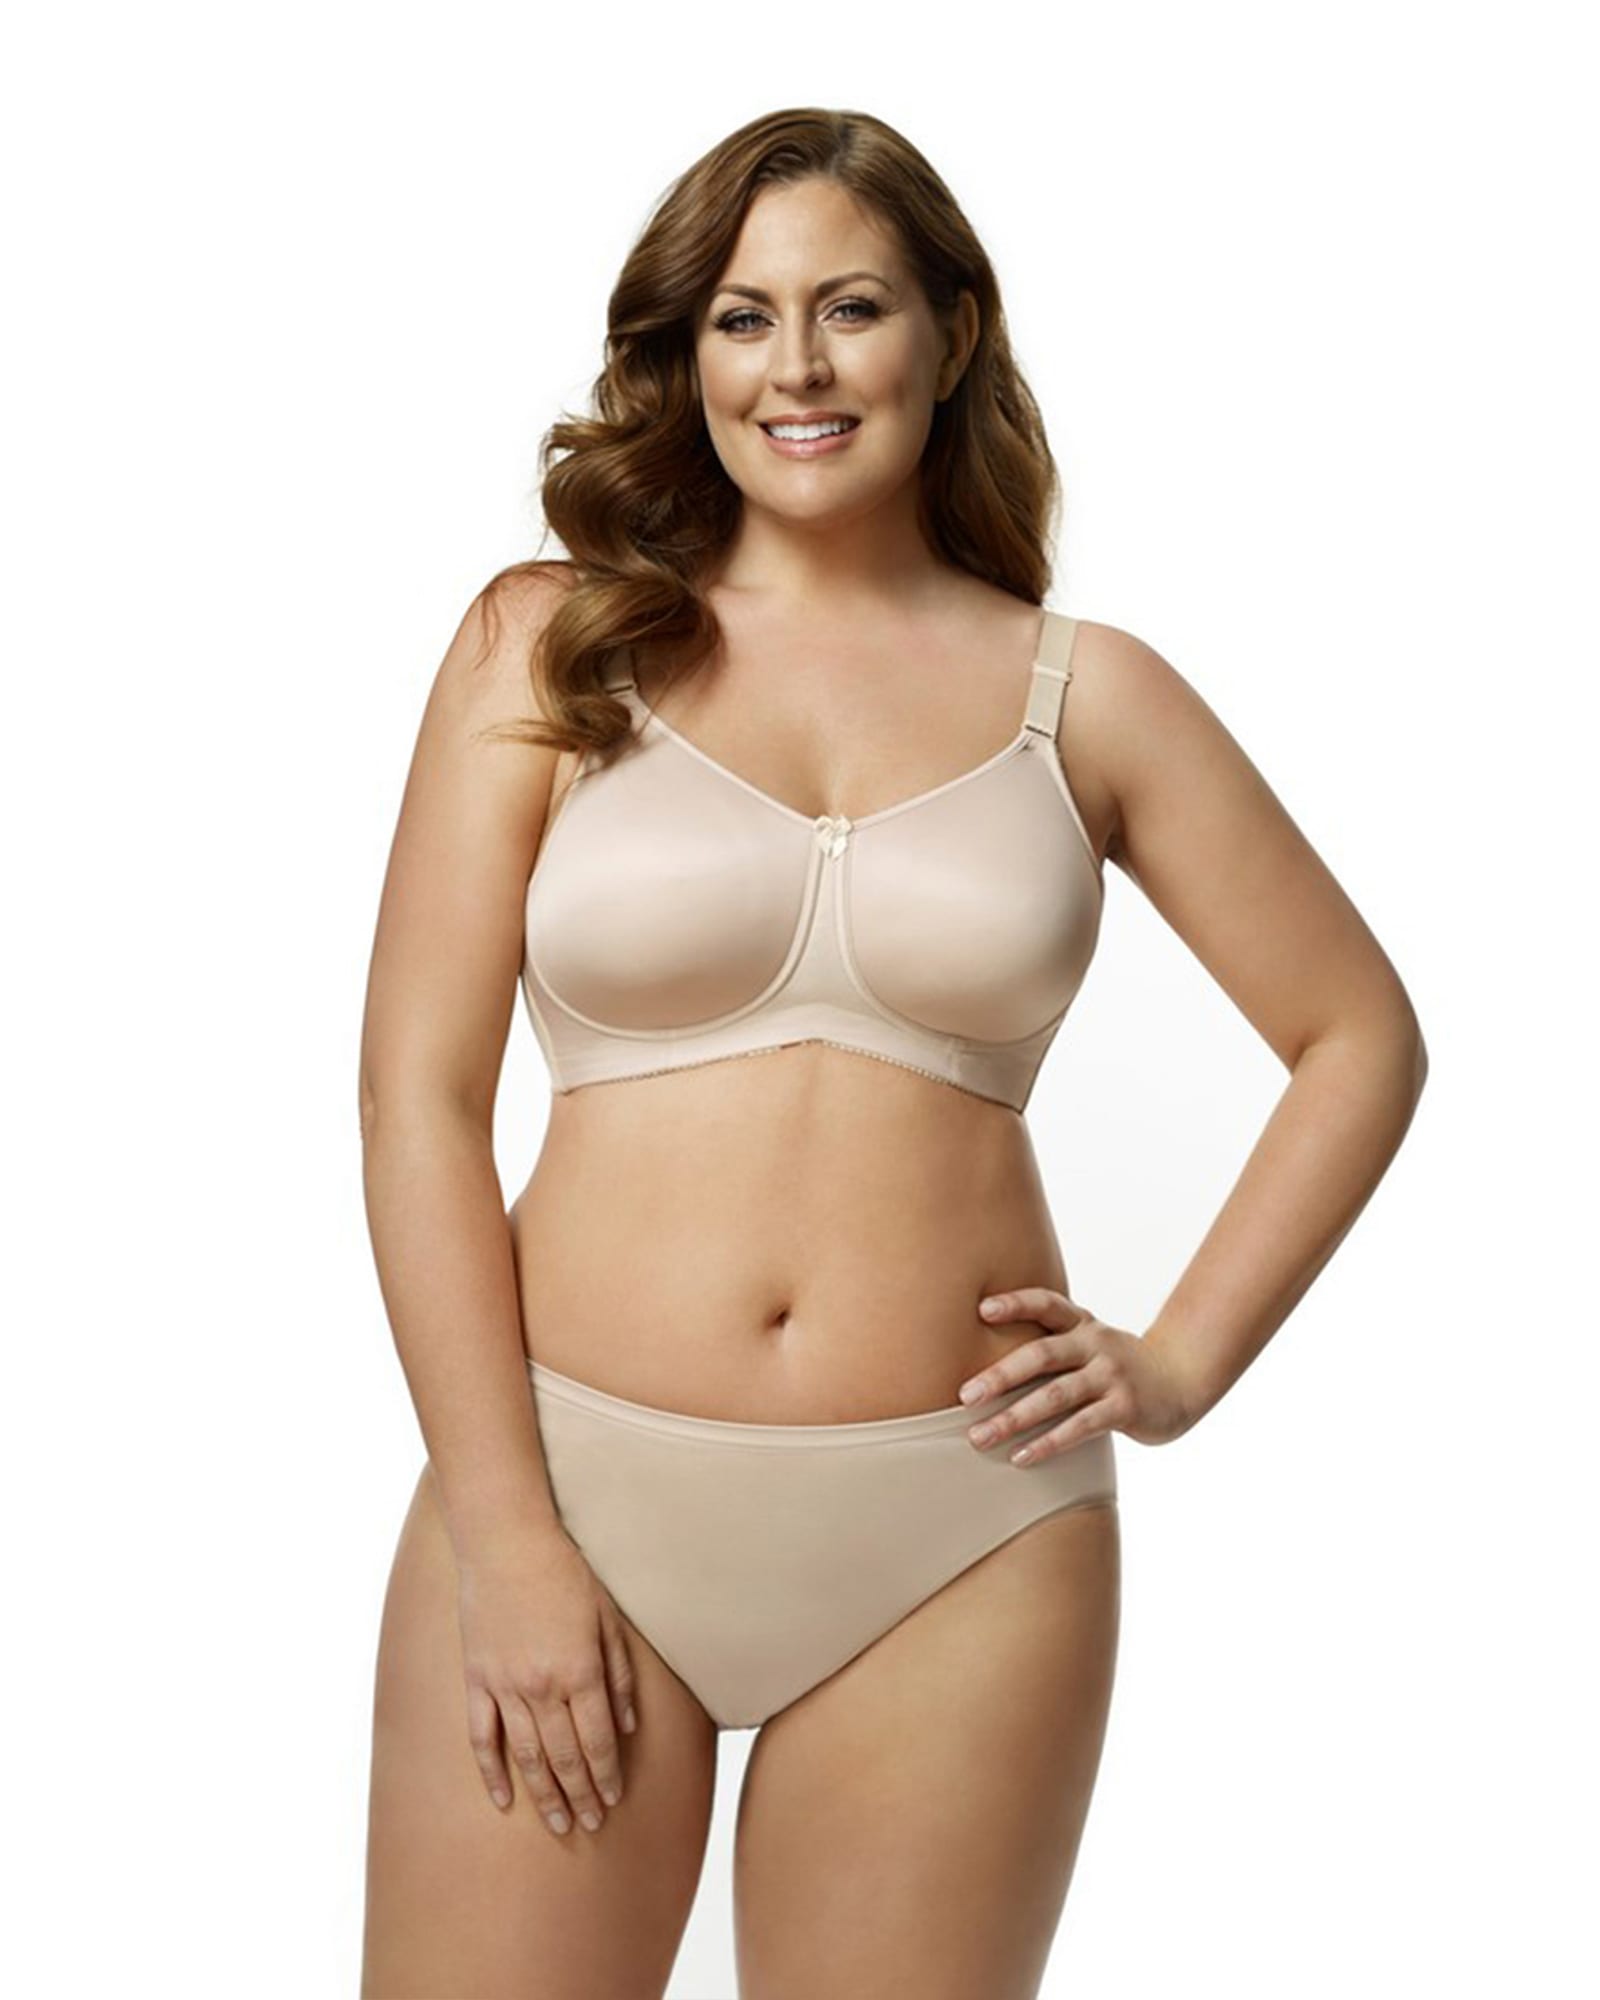 Womens Smoothing Underwired Moulded Nursing Bra, 34G, Nude